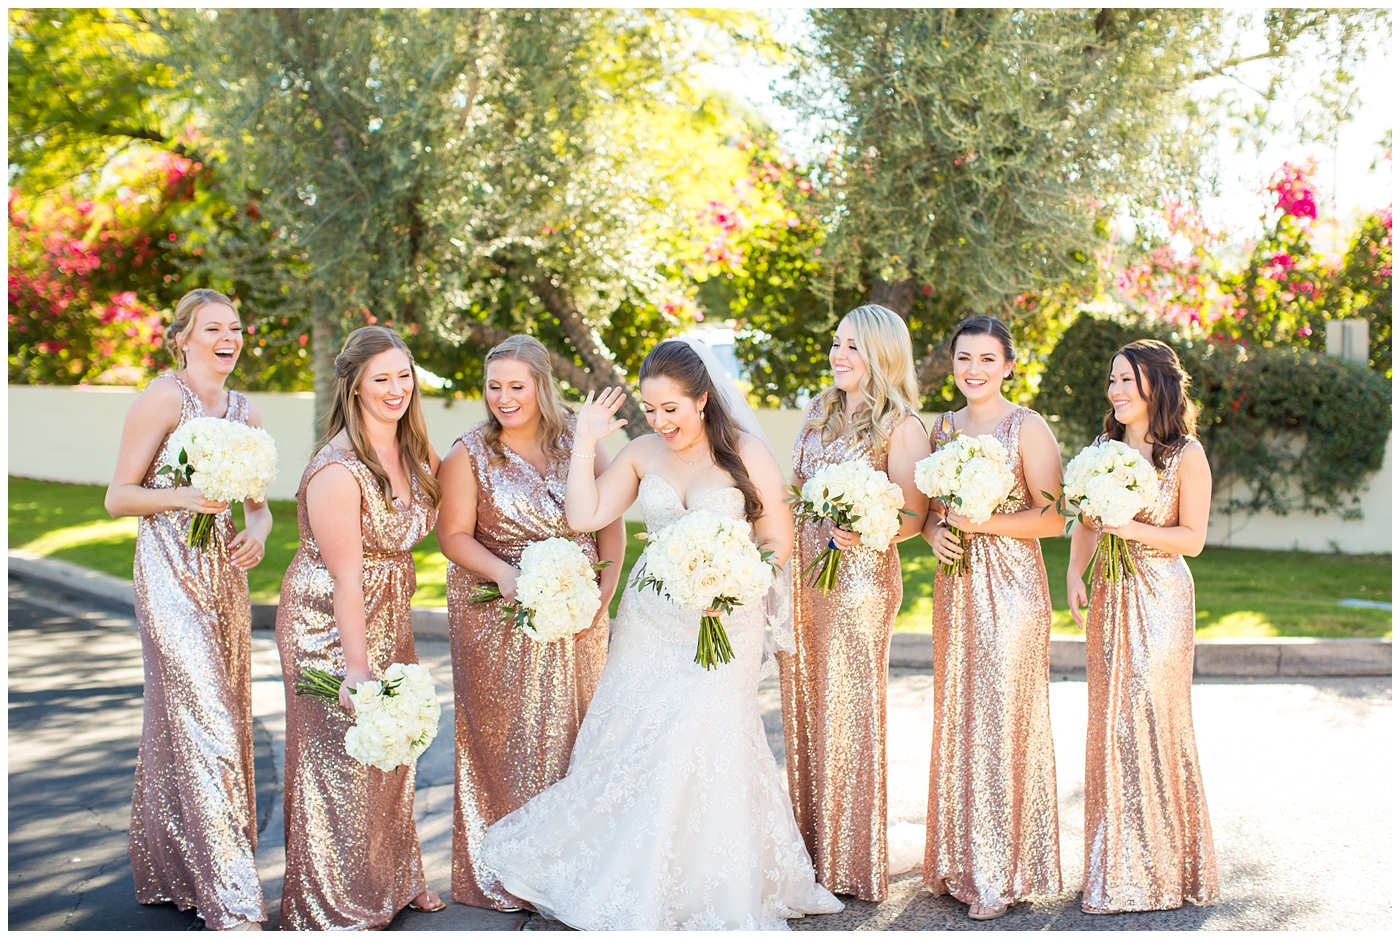 white rose wedding bouquet with bride in lillian lottie couture wedding dress and bridesmaids in rose gold sequin dress helping bride get ready